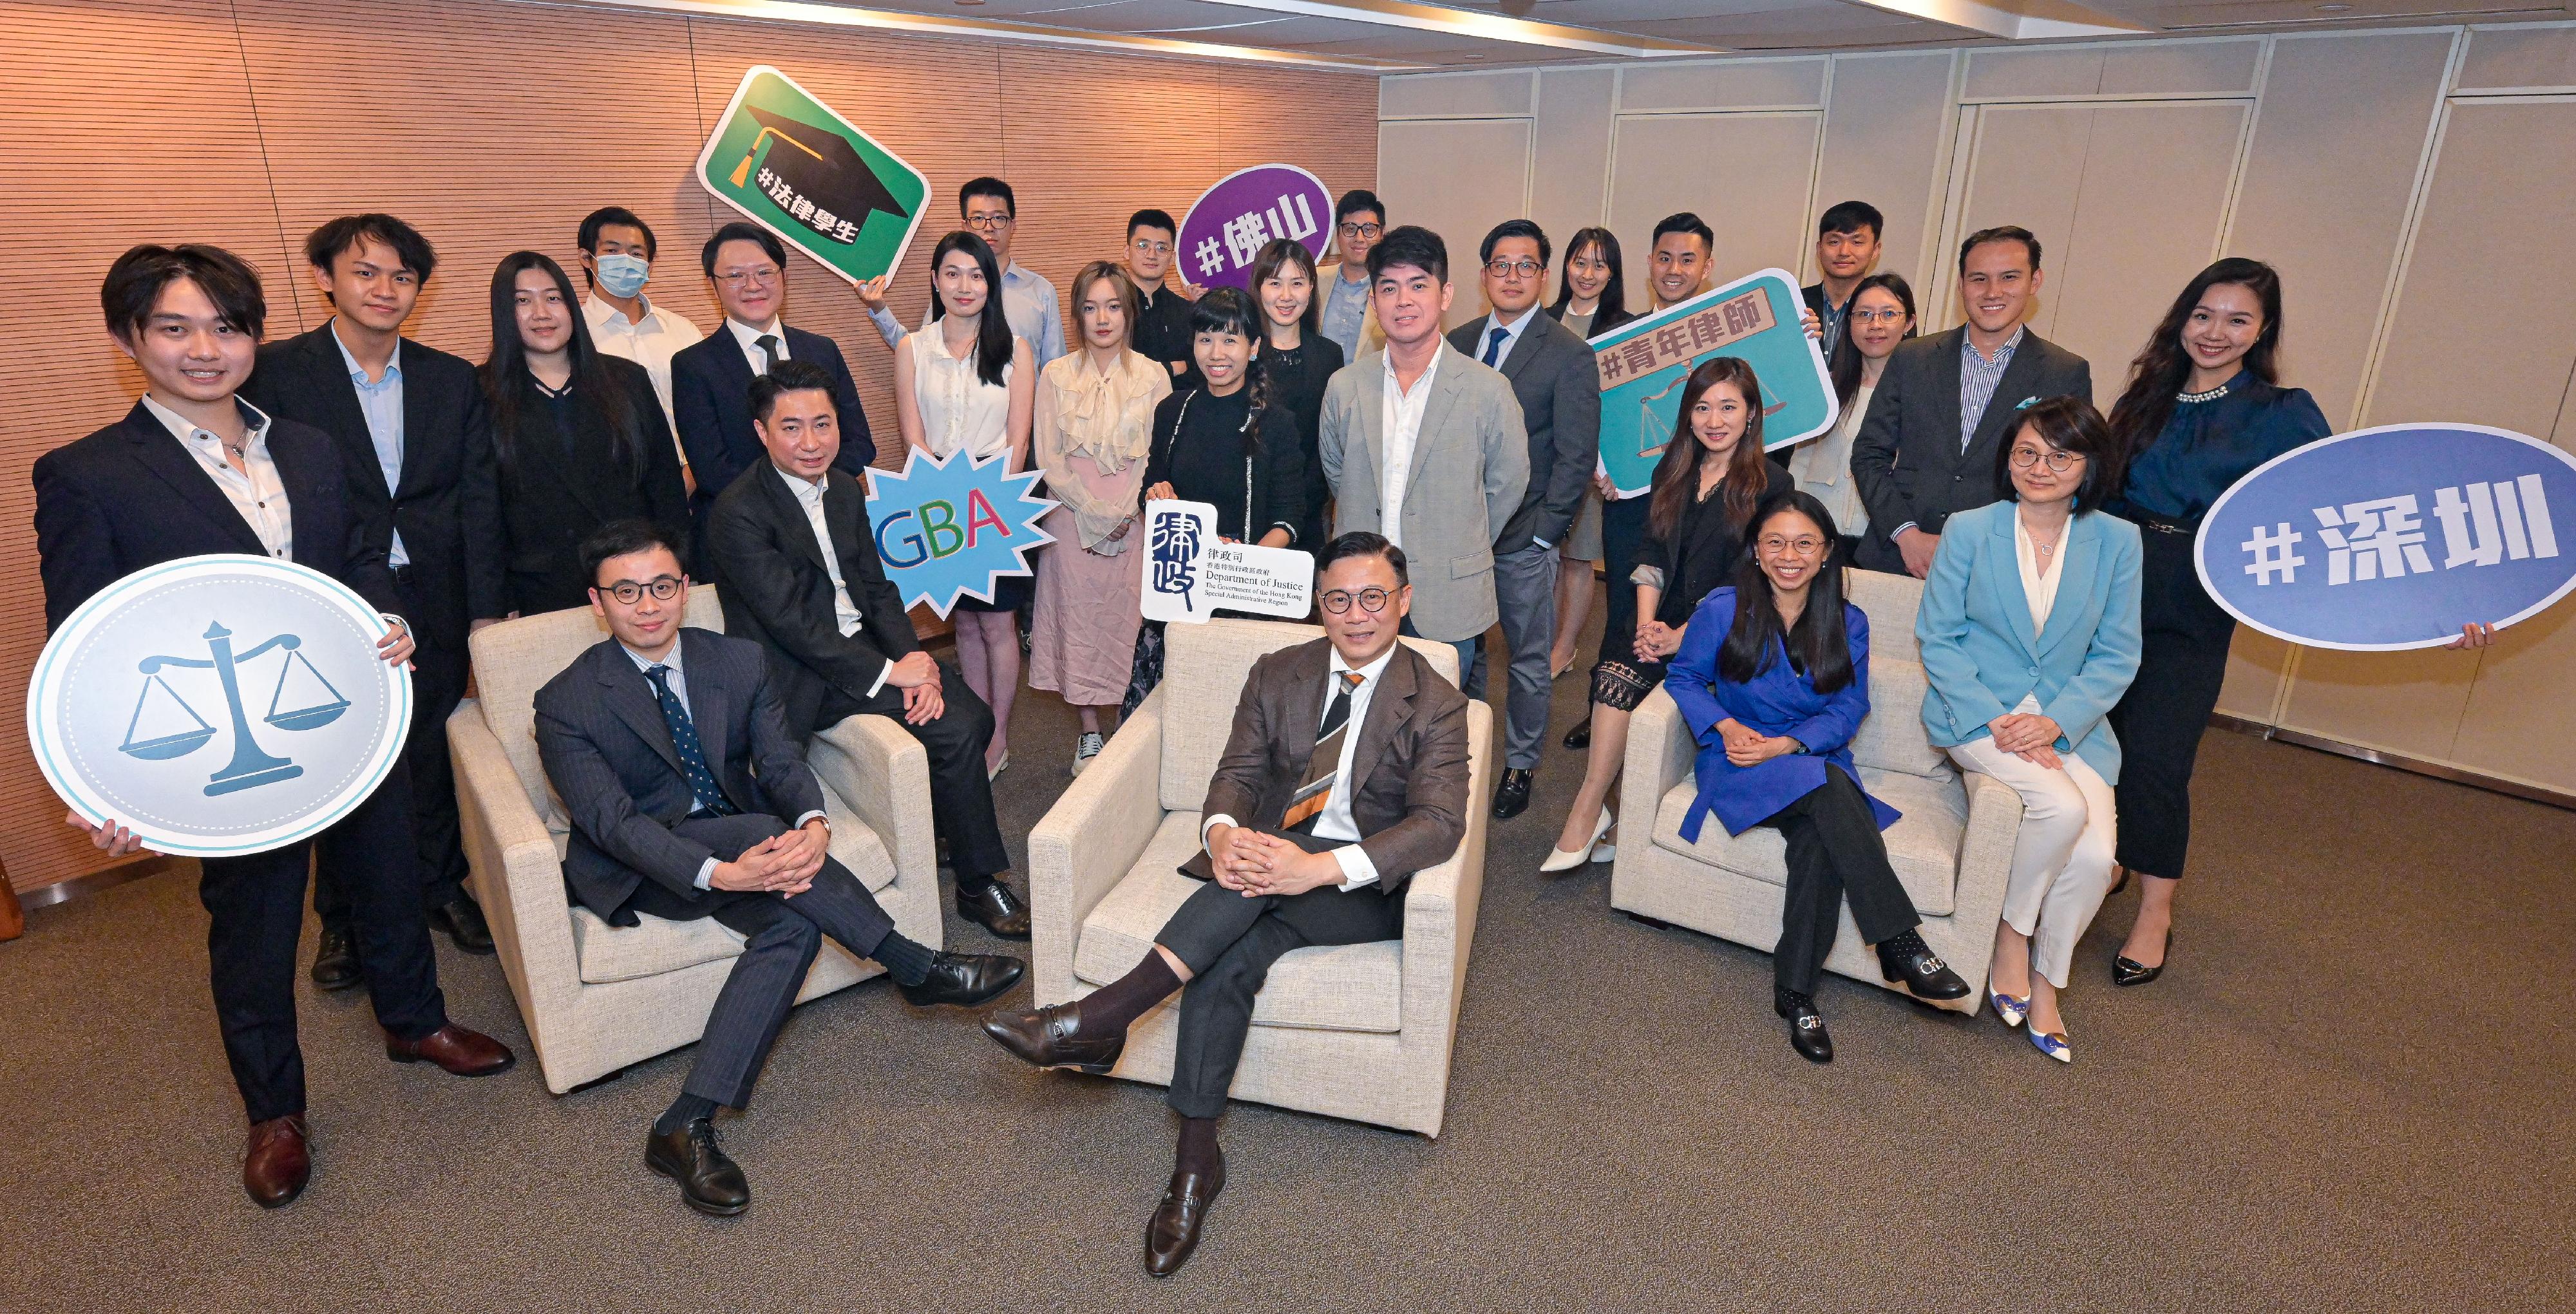 The Deputy Secretary for Justice, Mr Cheung Kwok-kwan, will lead a delegation of young lawyers comprising more than 30 members to visit two cities in the Guangdong-Hong Kong-Macao Greater Bay Area, Shenzhen and Foshan, tomorrow (November 16). Photo shows Mr Cheung (front row, centre) and members of the delegation at the pre-trip briefing.

